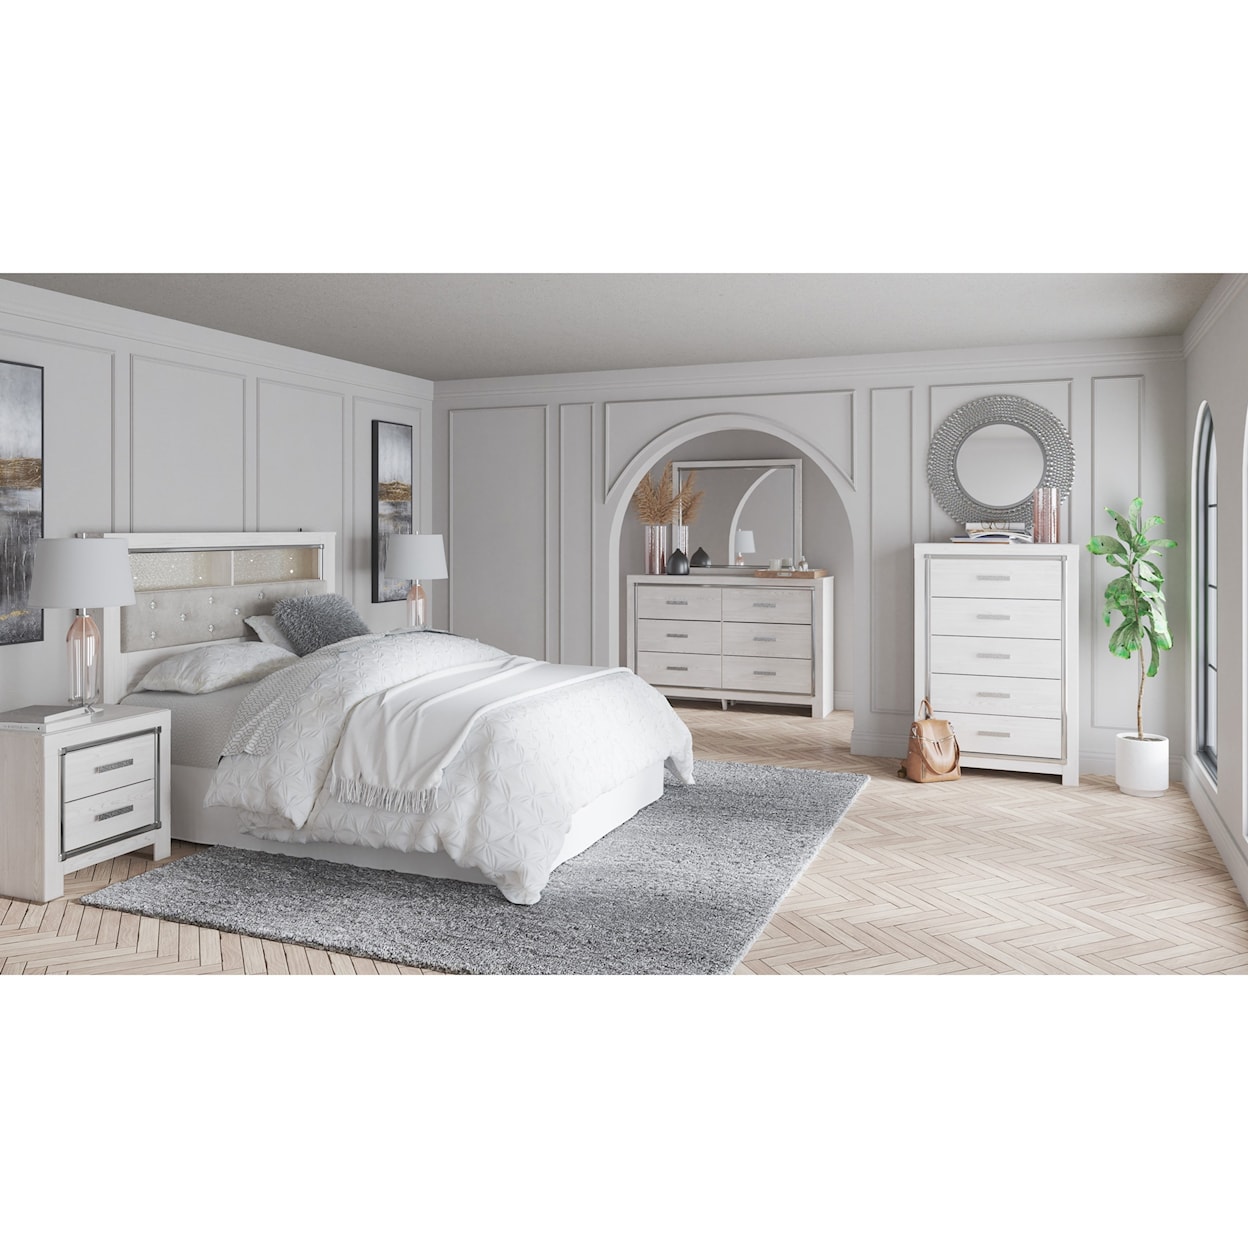 Signature Design by Ashley Furniture Altyra Queen Bedroom Group